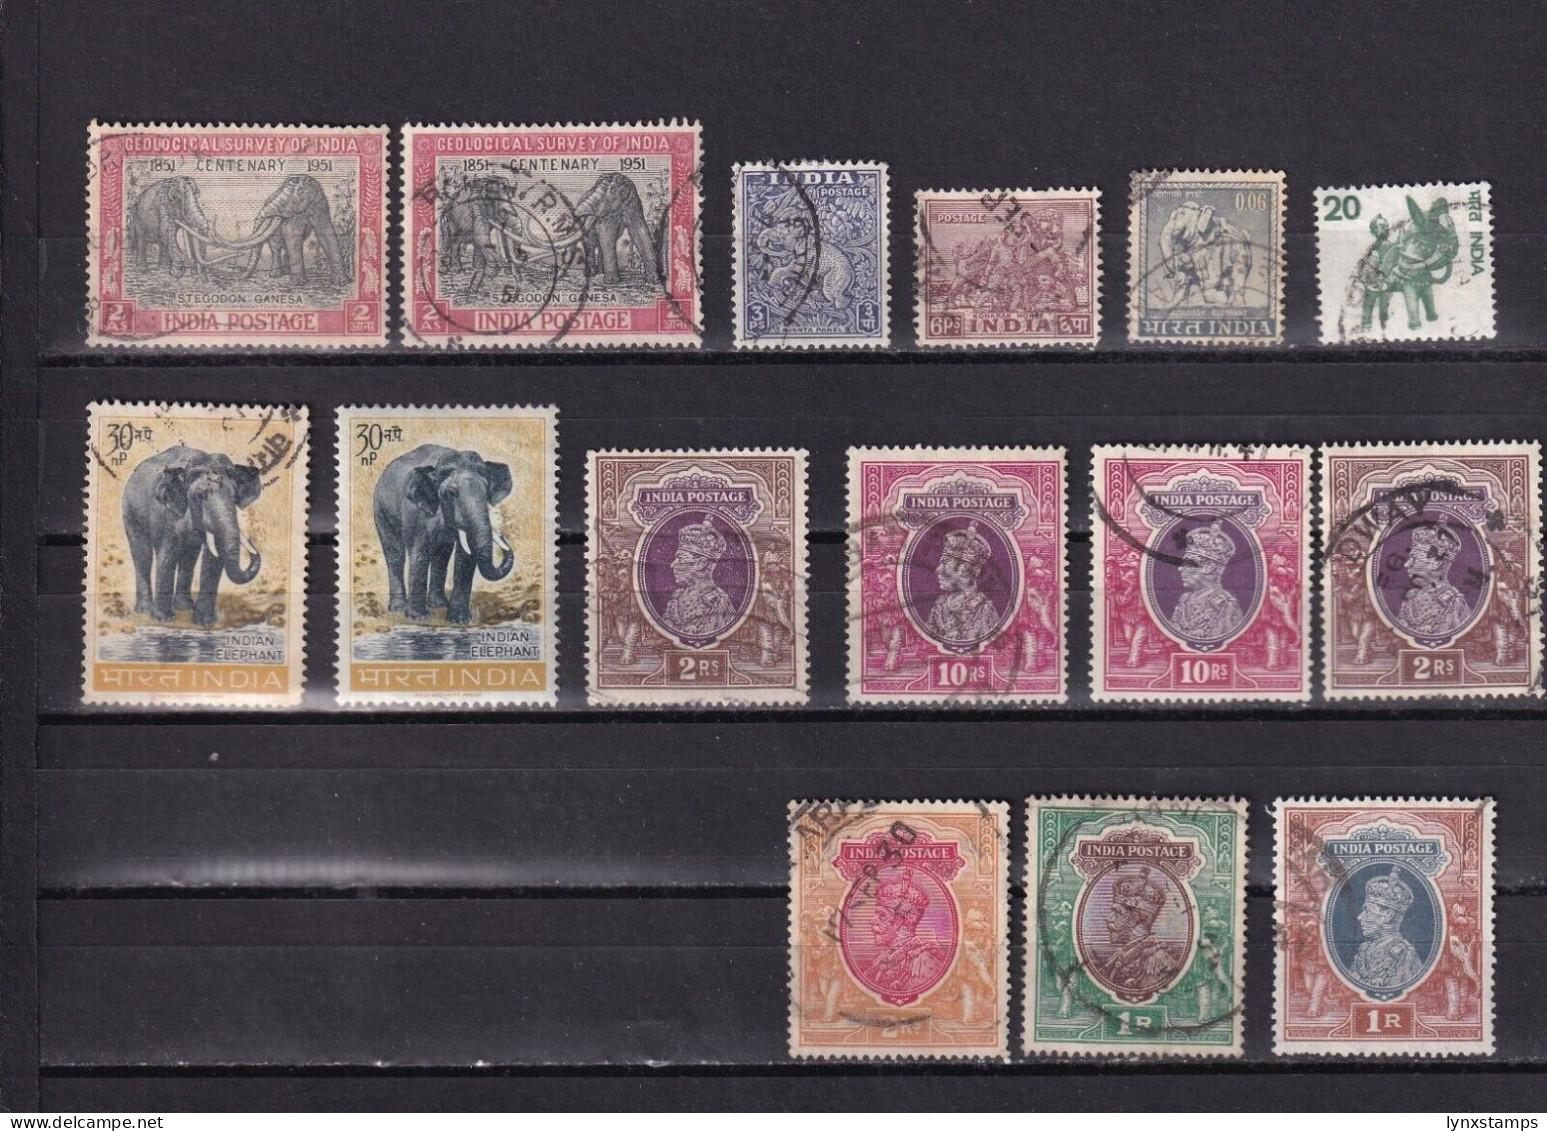 SA03 India Various Stamps With Elephants - Eléphants